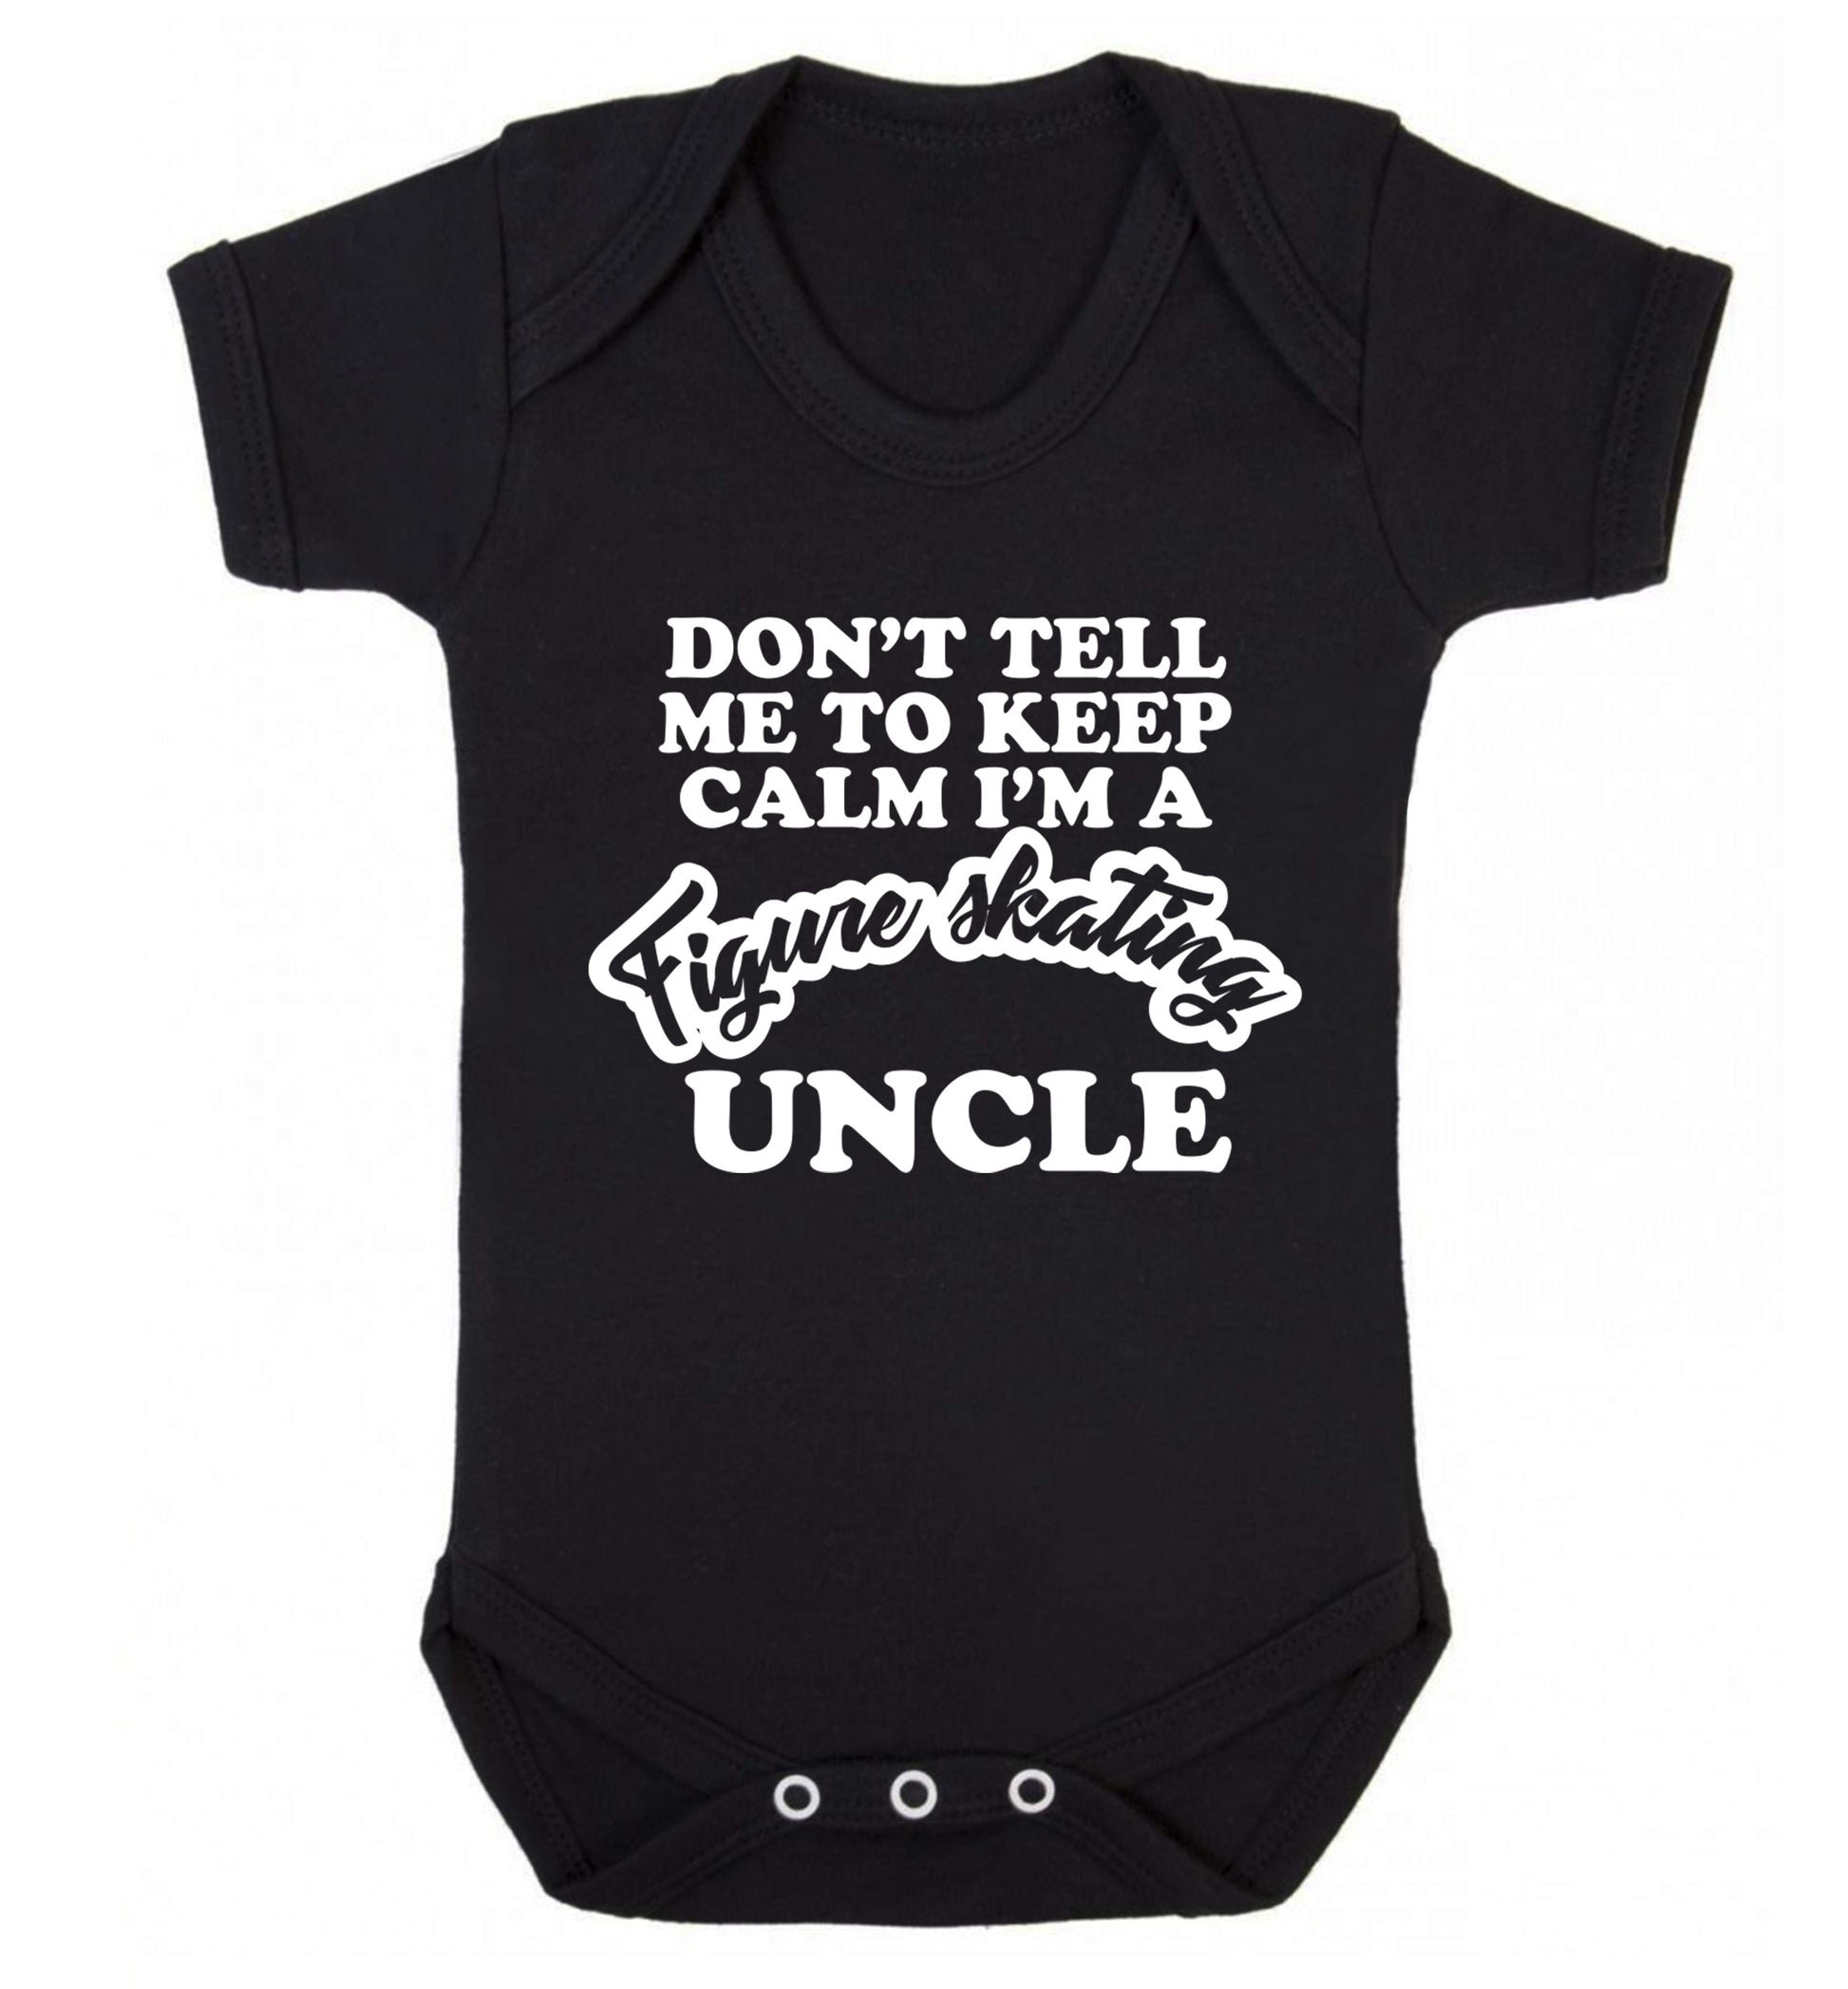 Don't tell me to keep calm I'm a figure skating uncle Baby Vest black 18-24 months